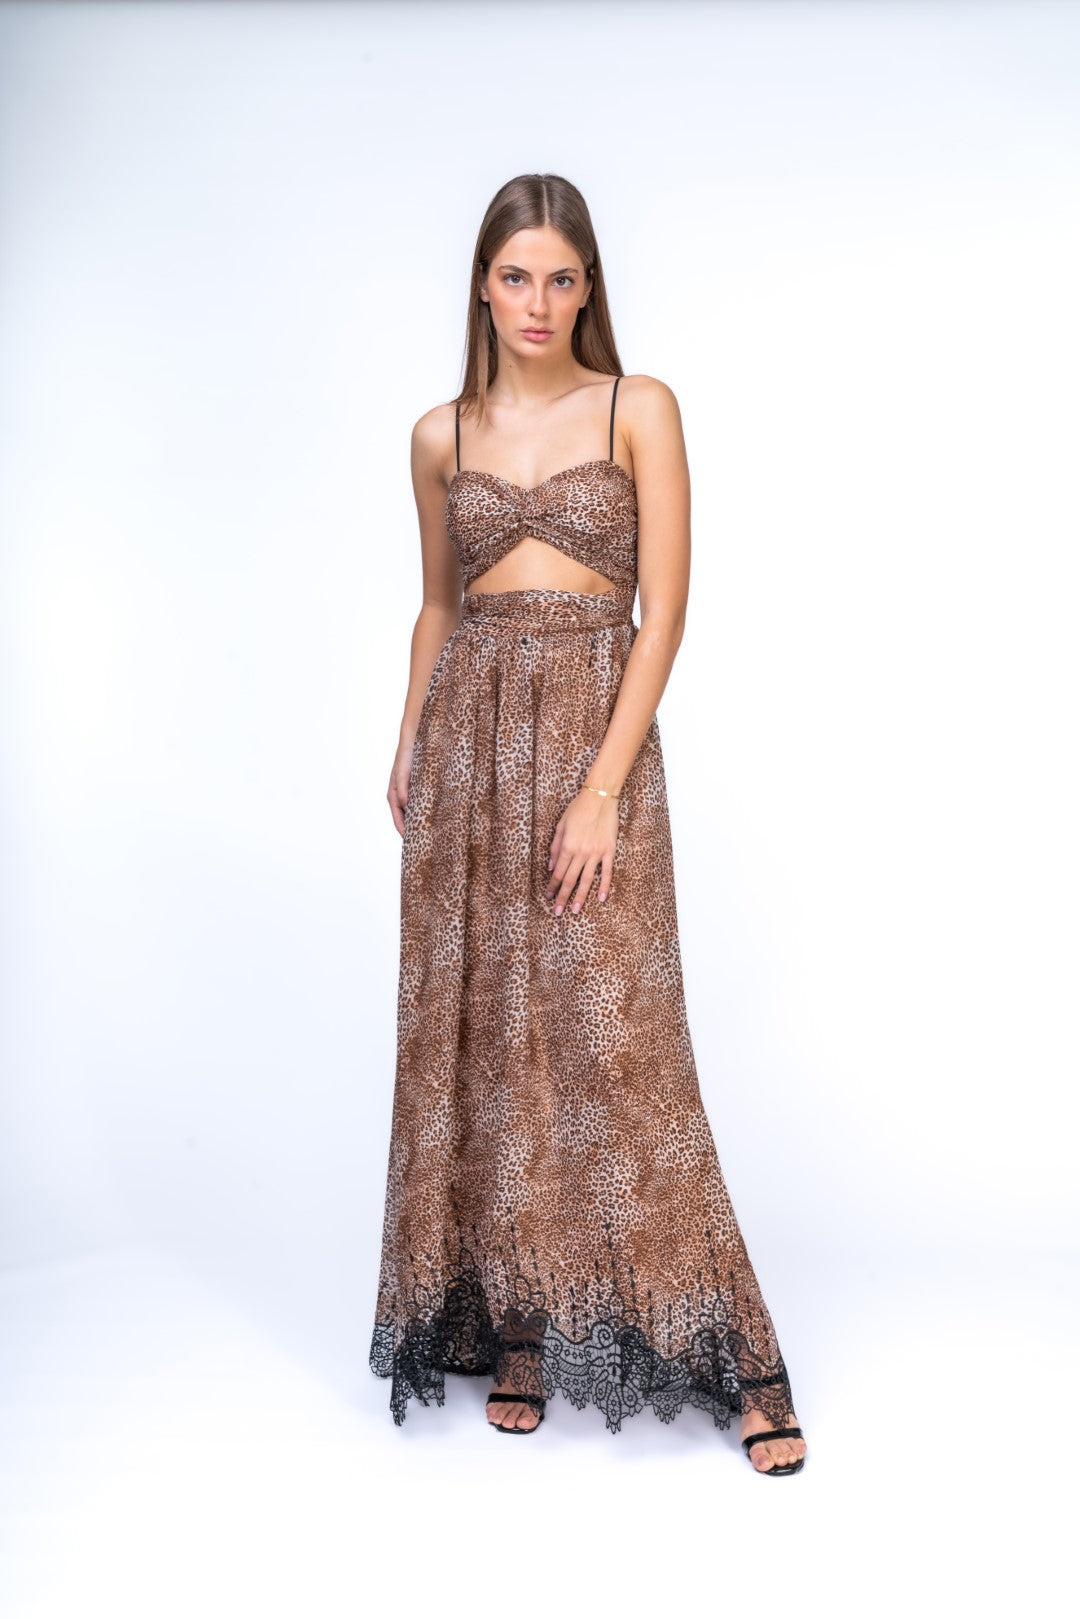 Leopoard Maxi Dress with Frontal Cut Out and Lace Trimming